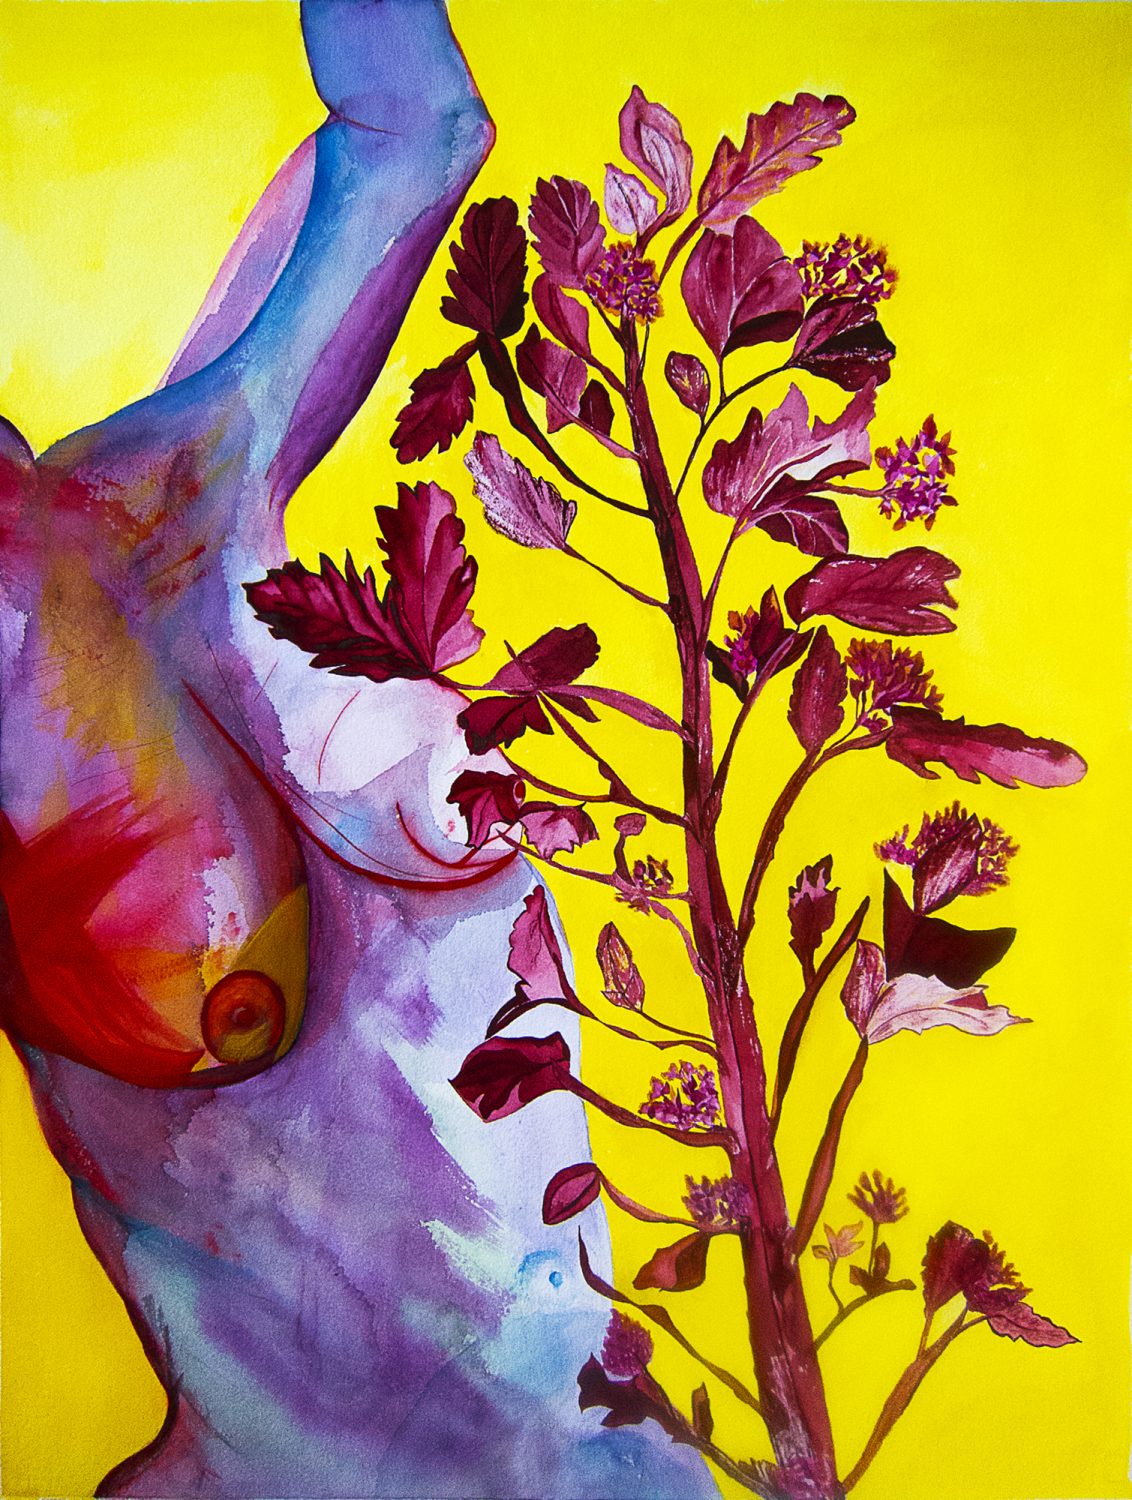 Nude Front Torso Woman Dancing with a Branch of Maroon Leaves